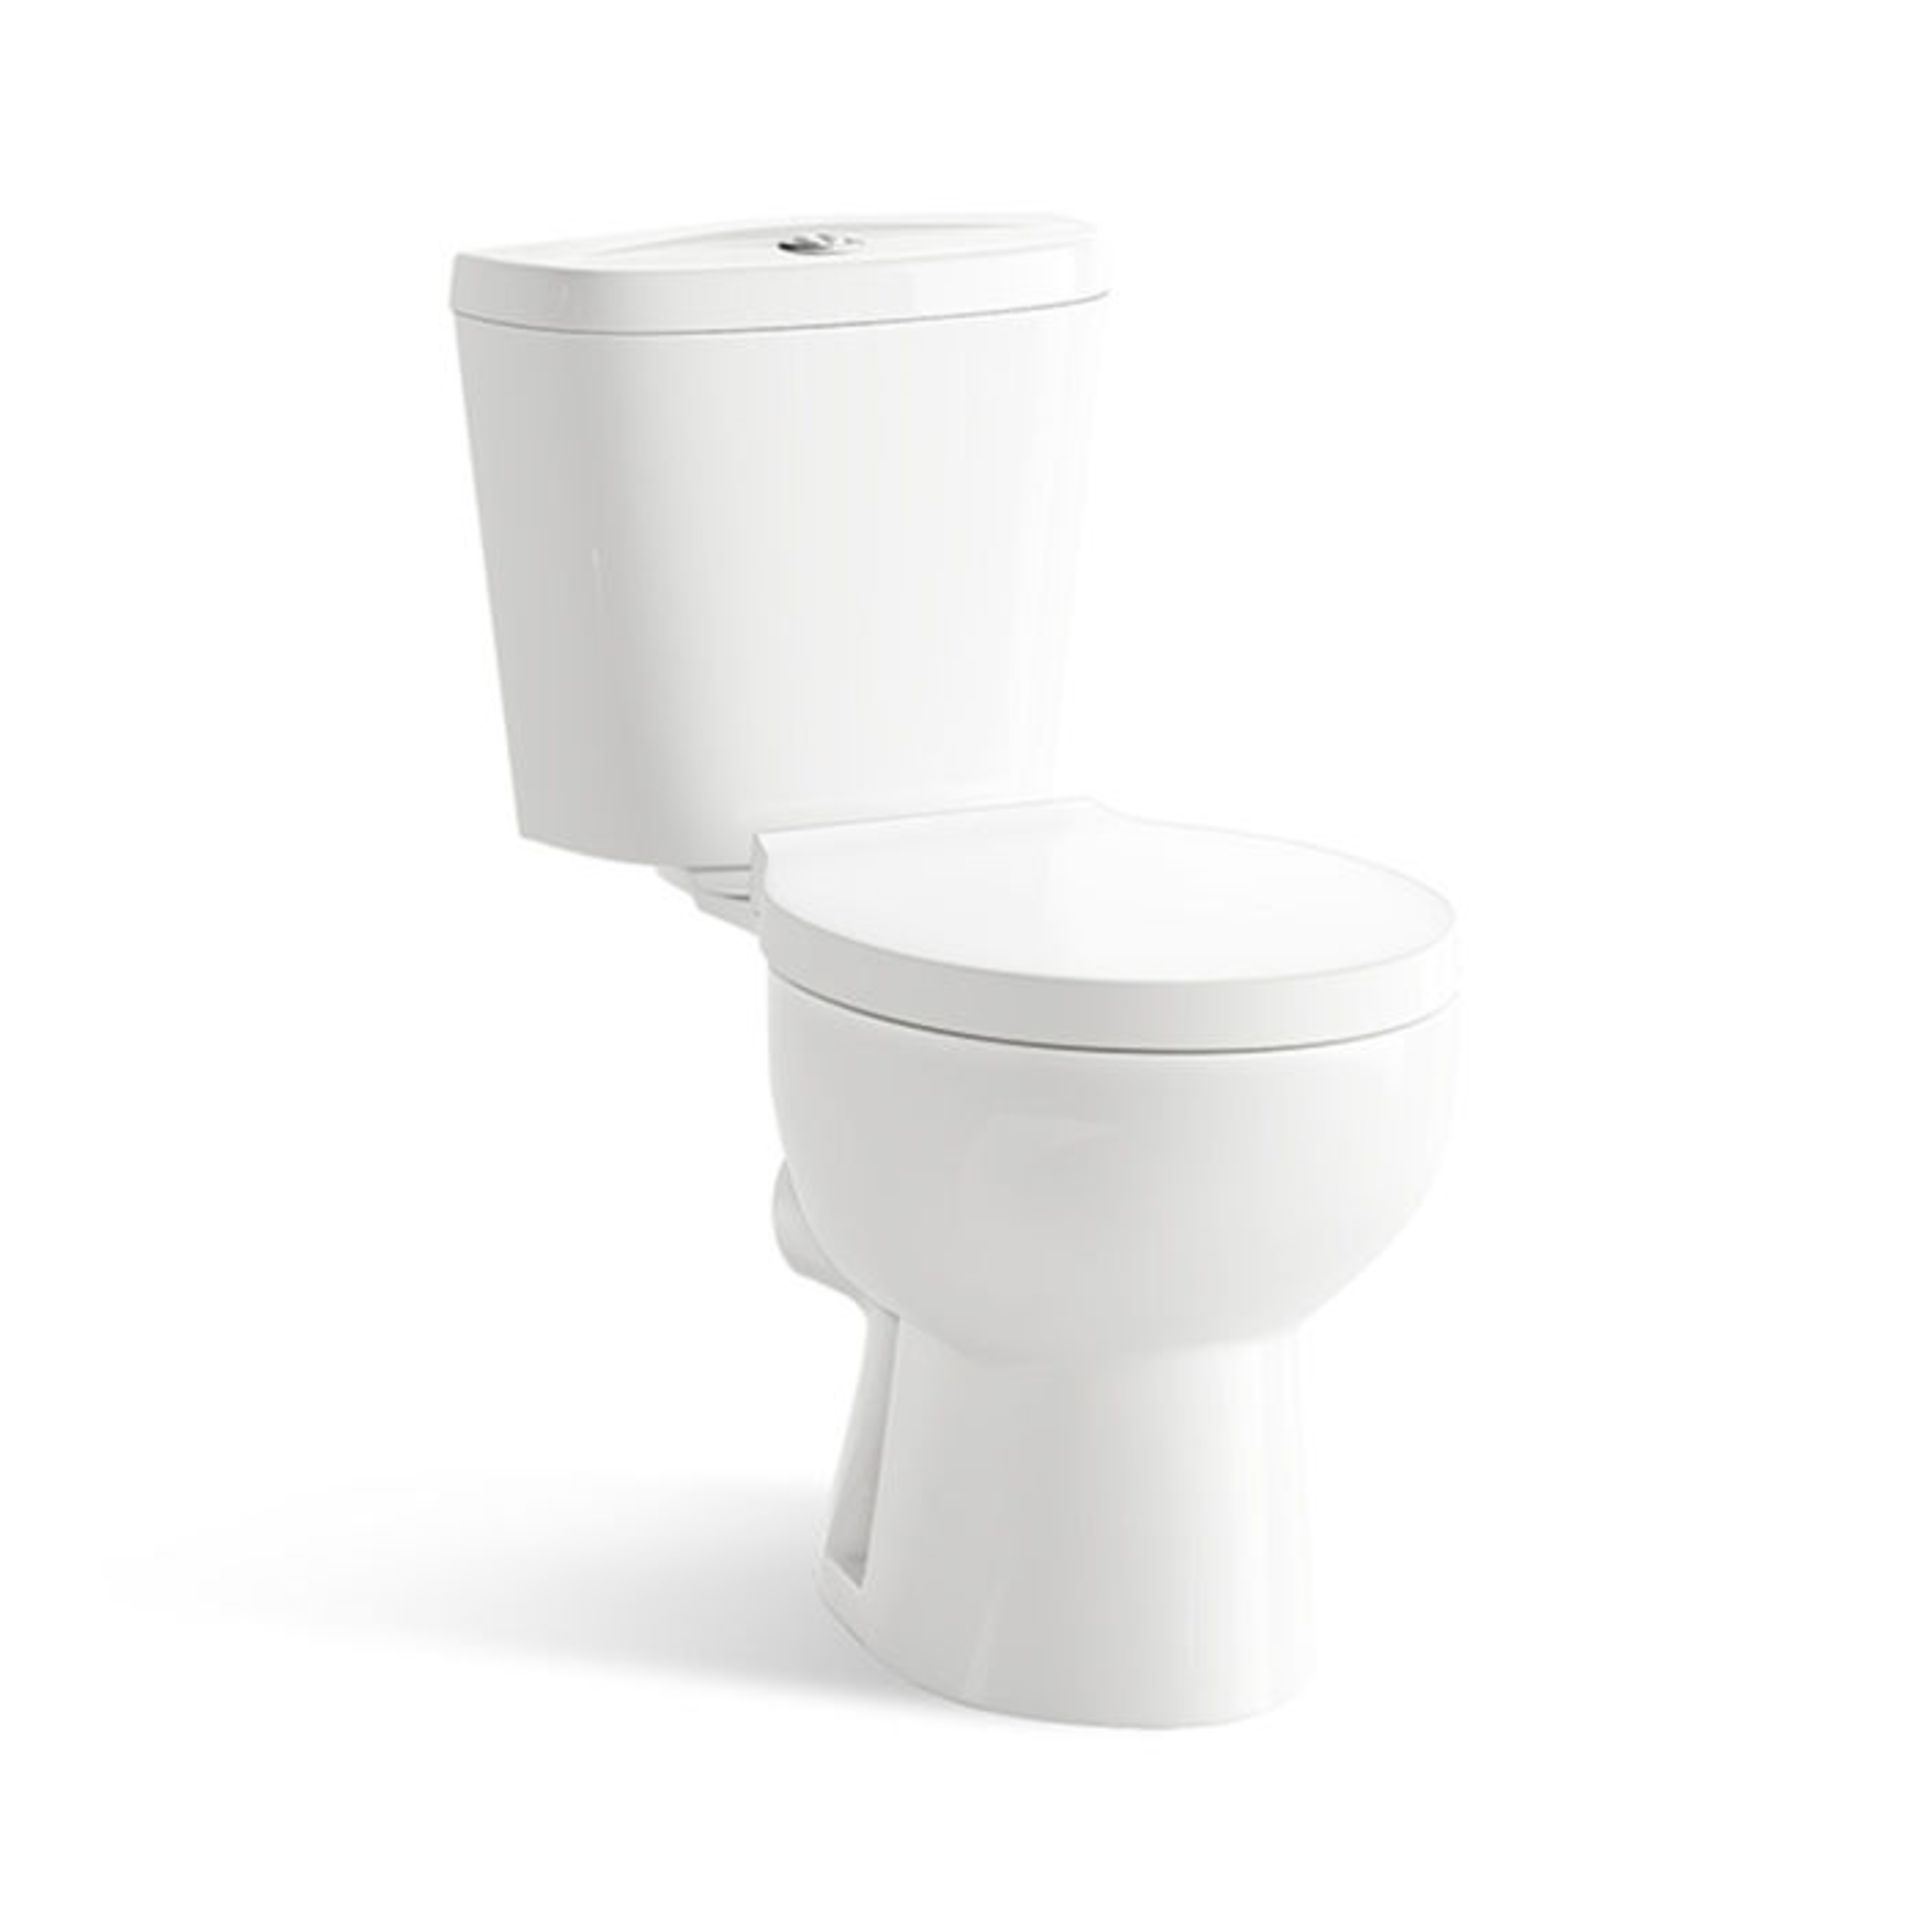 (OS102) Quartz Close Coupled Toilet. We love this because it is simply great value! Made from